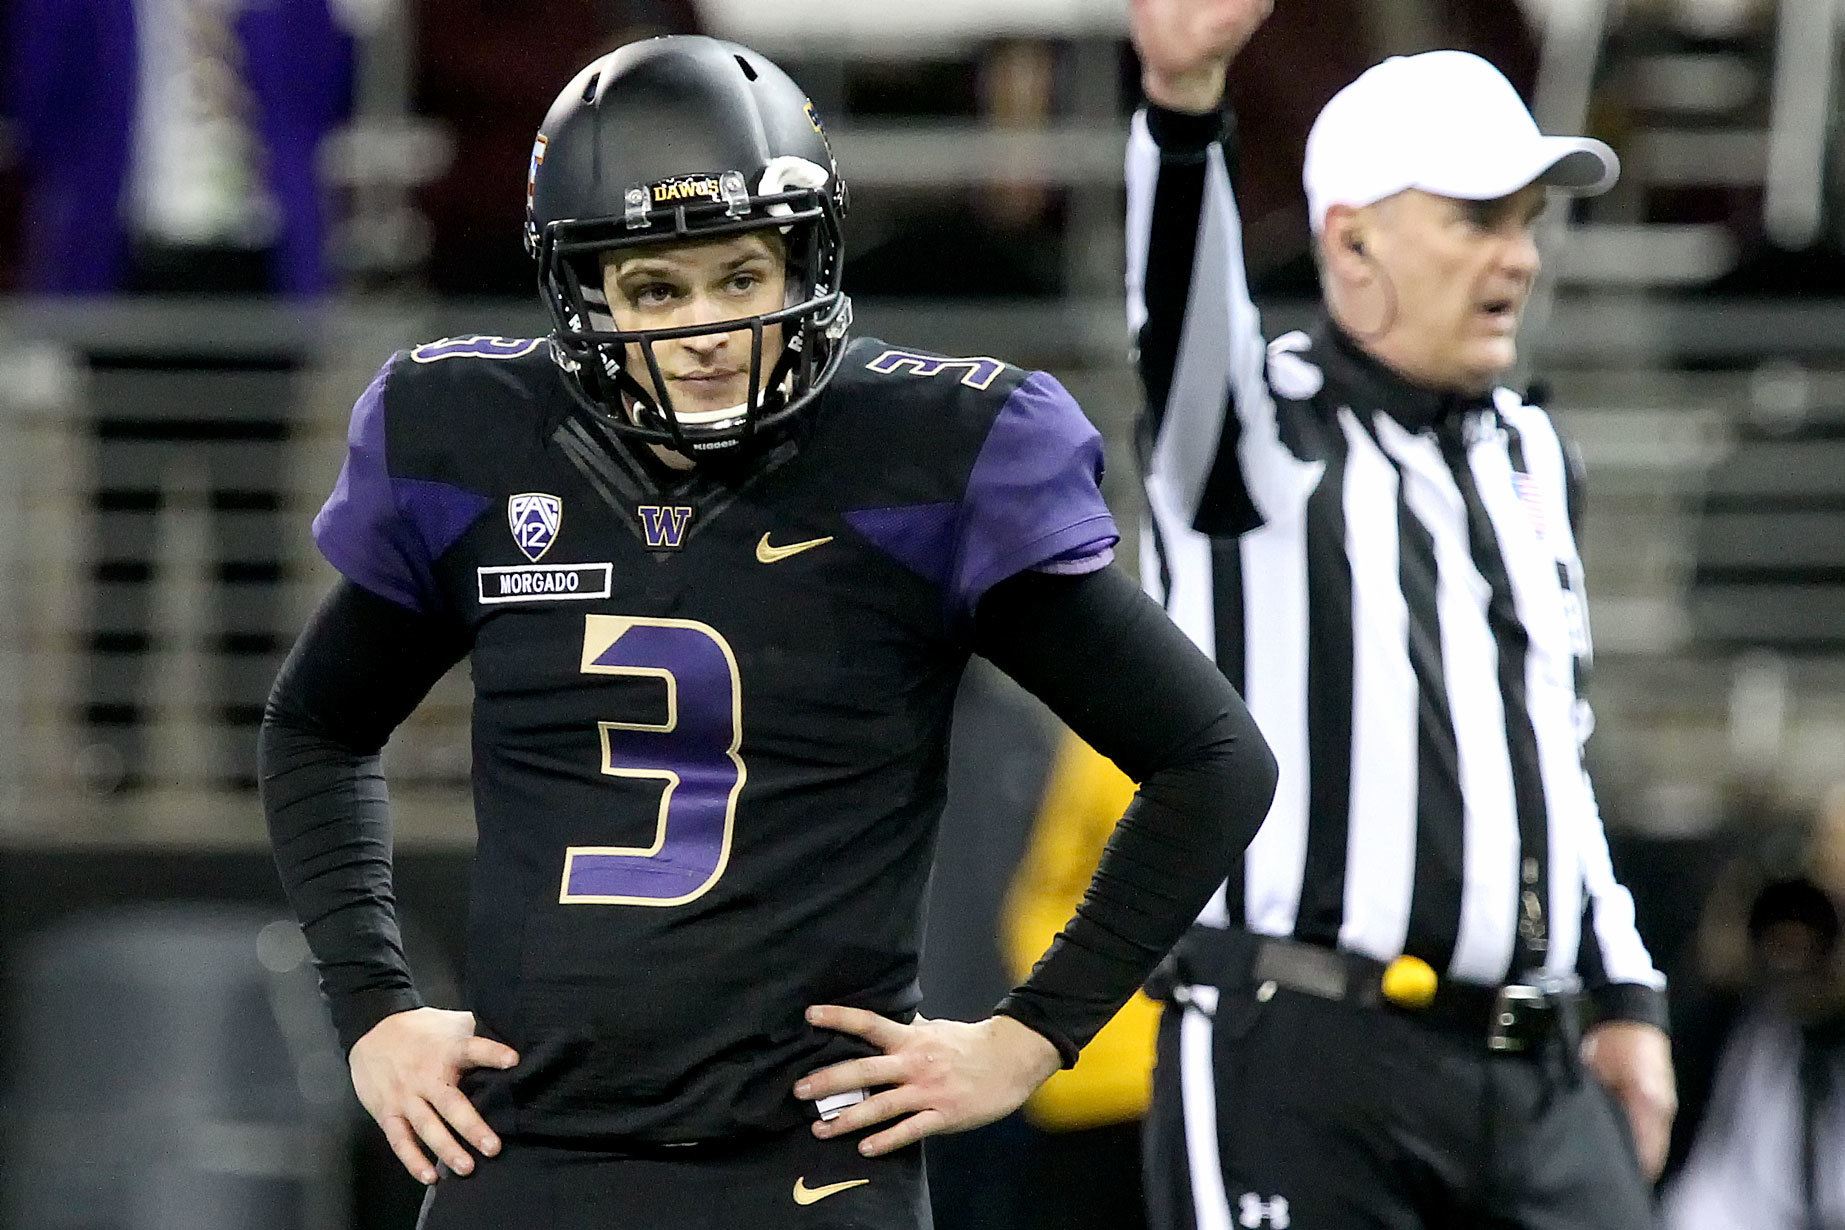 Huskies’ playoff hopes take major blow with 26-13 loss to USC